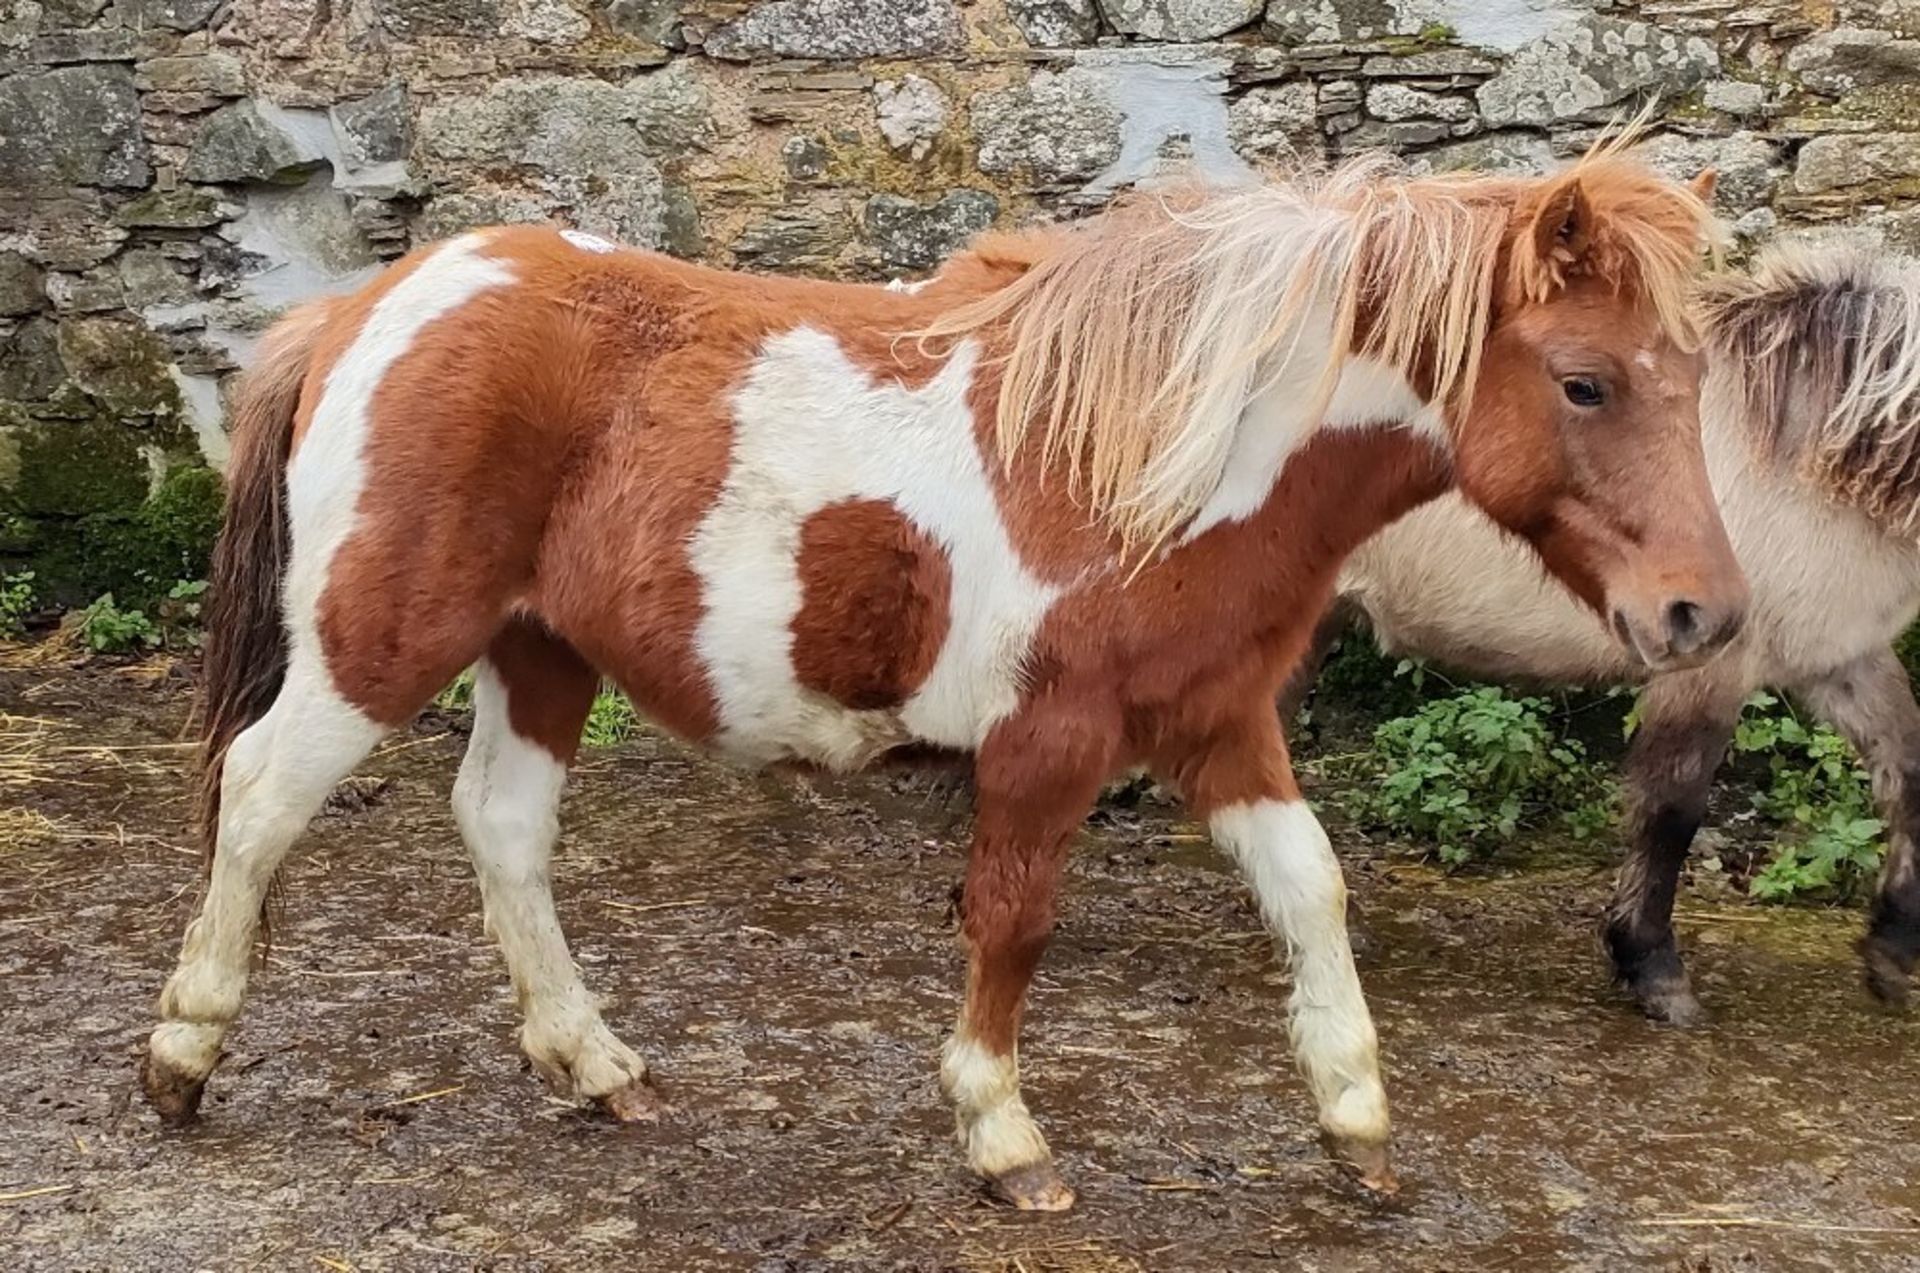 'GODSWORTHY' DARTMOOR HILL PONY SKEWBALD FILLY APPROX 18 MONTHS OLD - Image 5 of 6